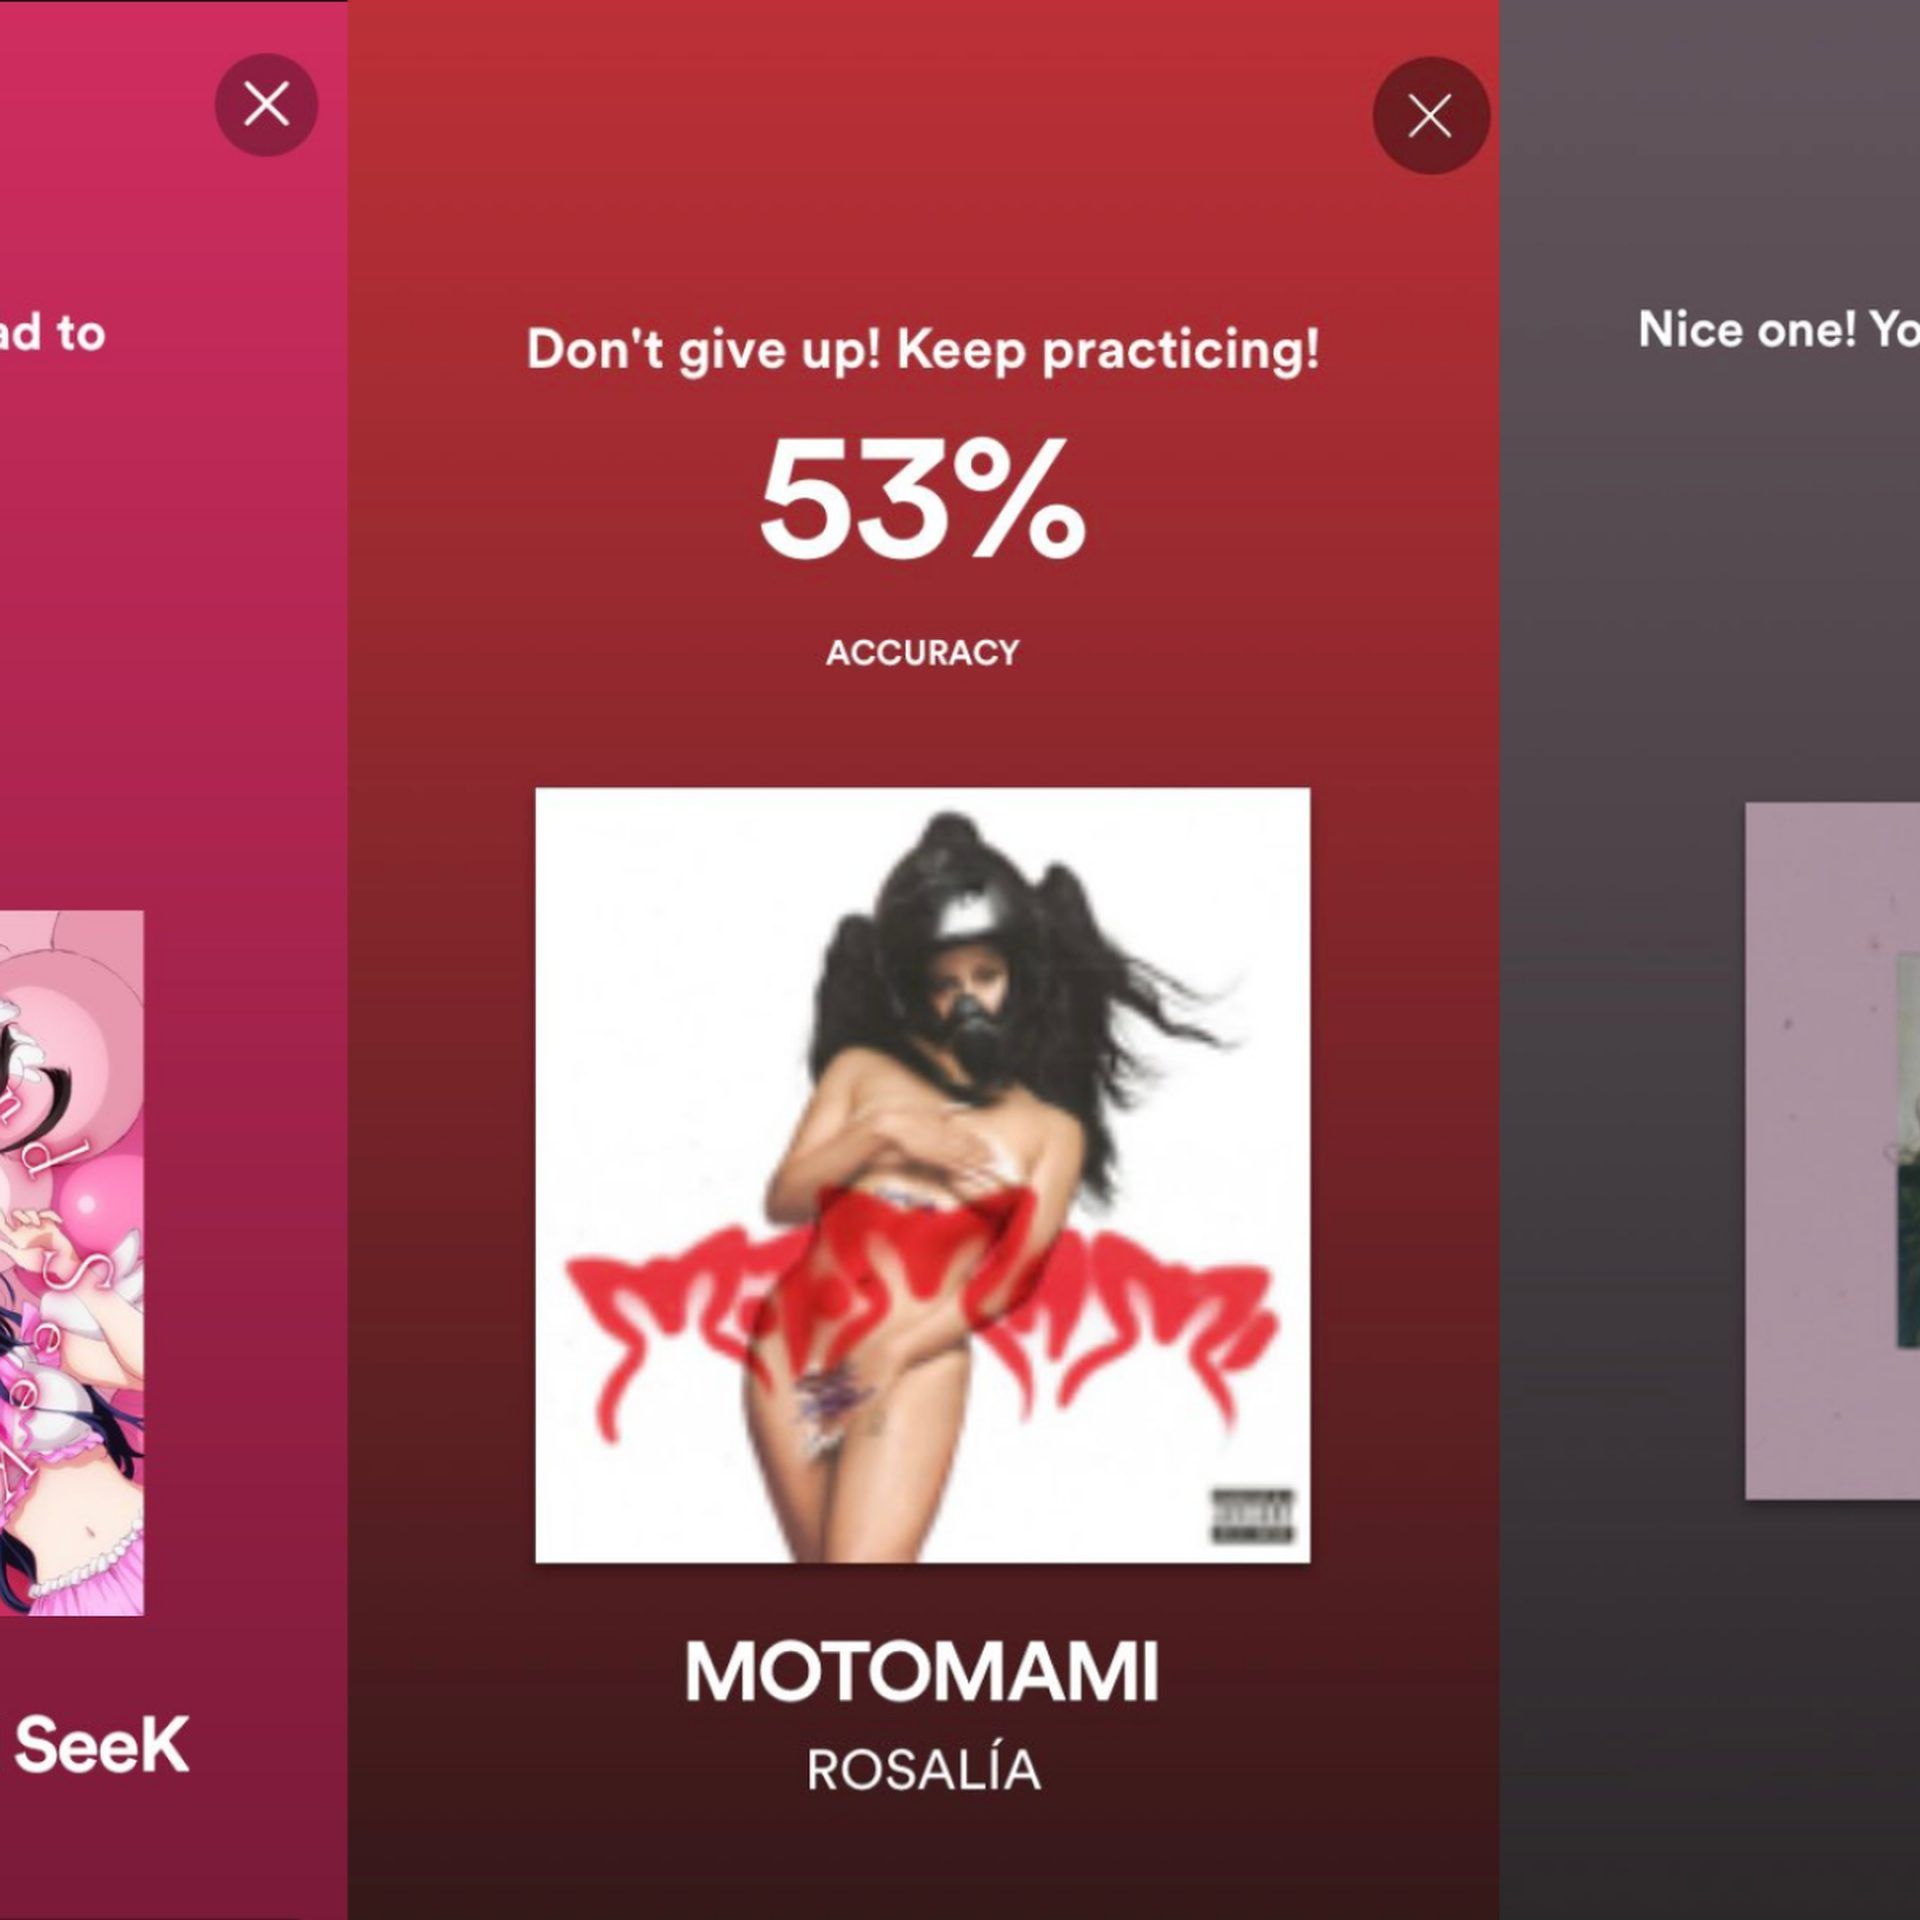 How to use Spotify Karaoke Mode: Click the "sing" button